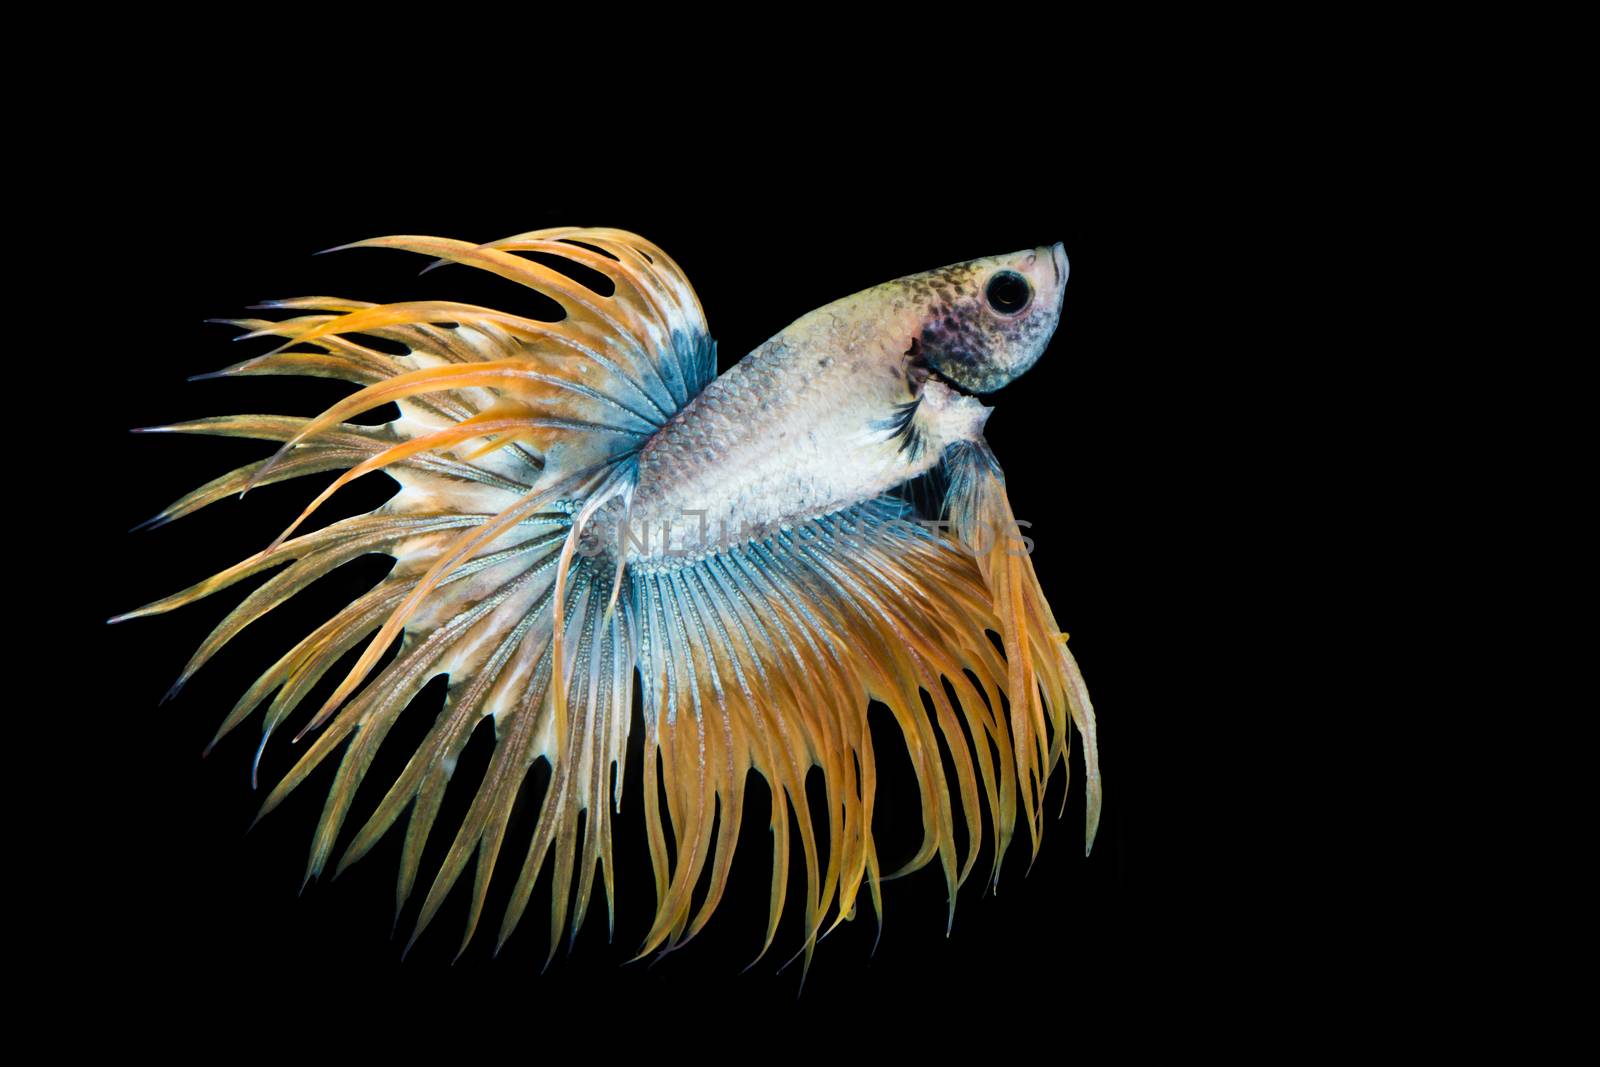 Yellow and blue betta fish by yuiyuize